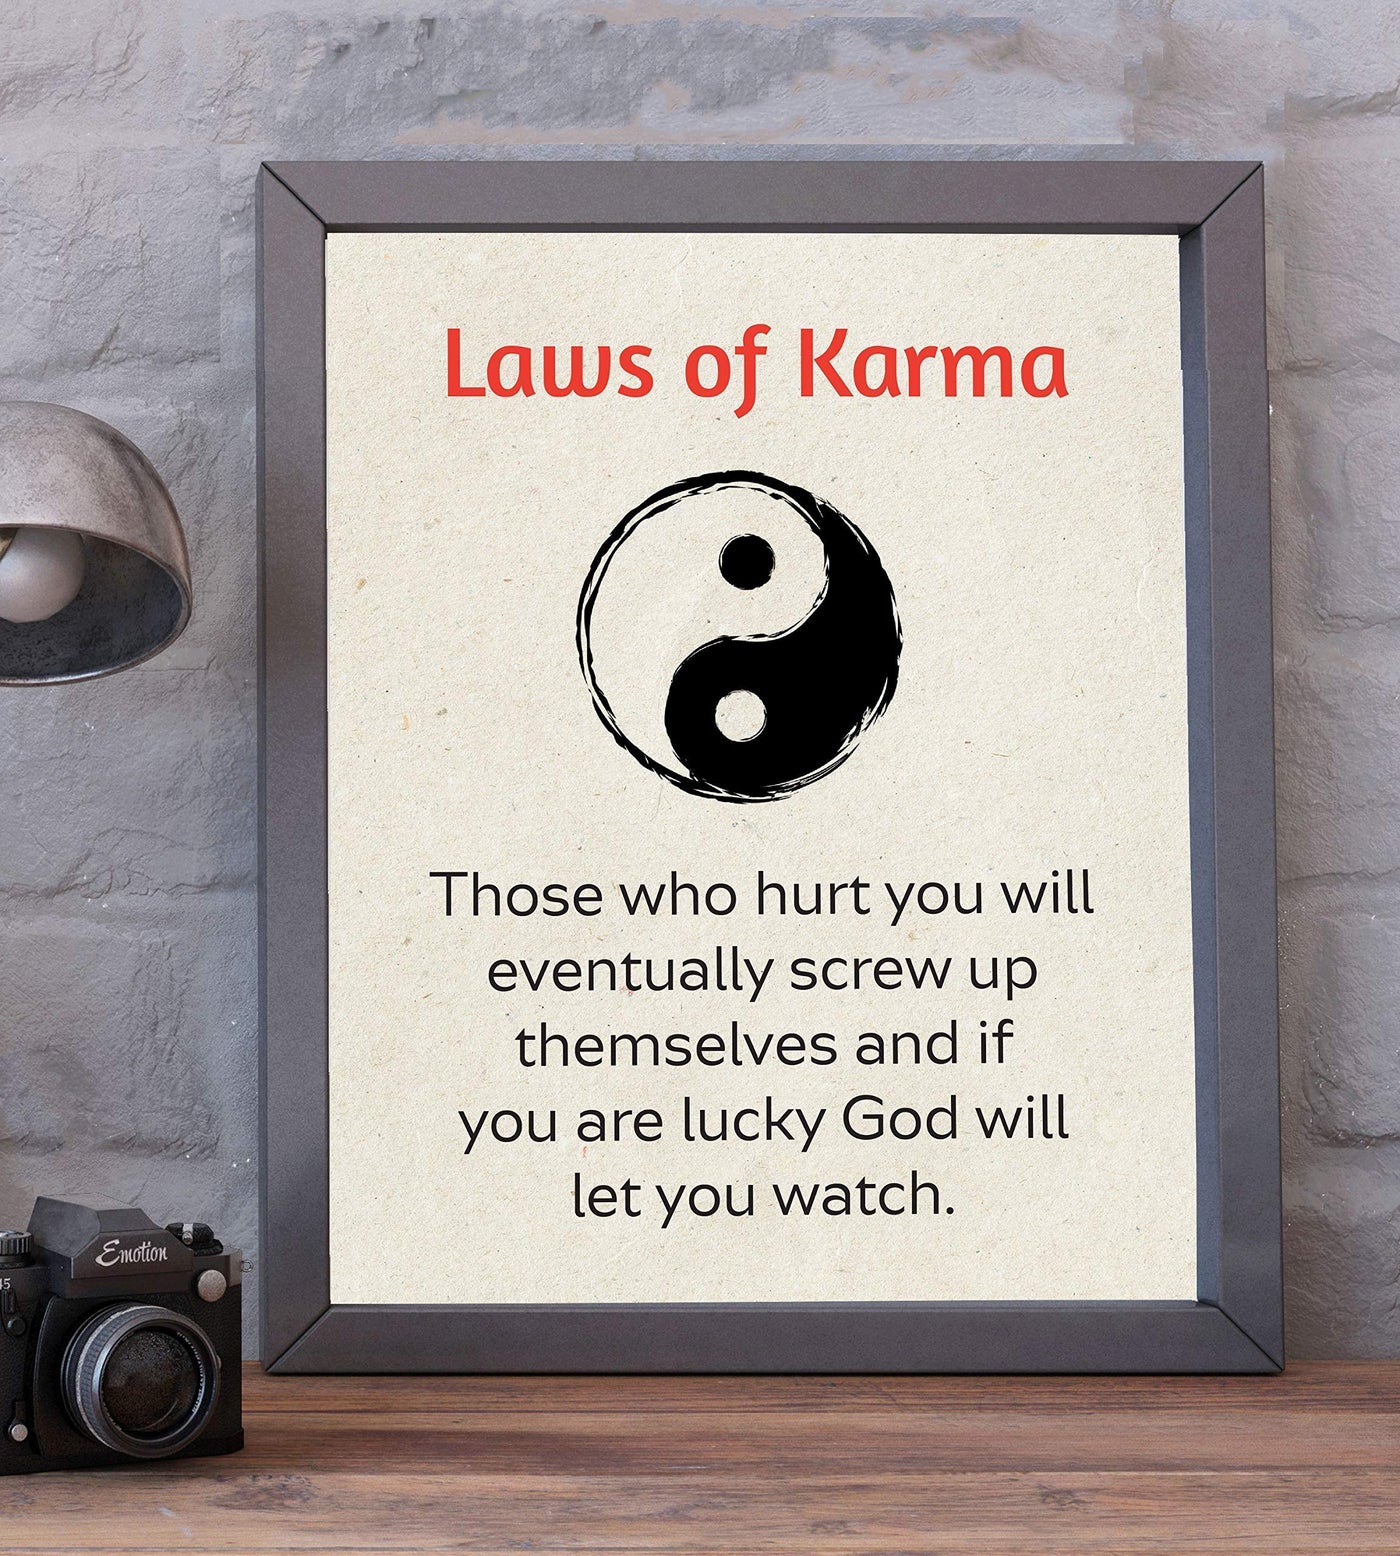 Laws of Karma Spiritual Quotes Wall Art- 8 x 10" Modern Inspirational Wall Print with Yin Yang Sign-Ready to Frame. Home-Studio-Office D?cor. Great Reminders on Karma. Makes a Perfect Zen Gift!